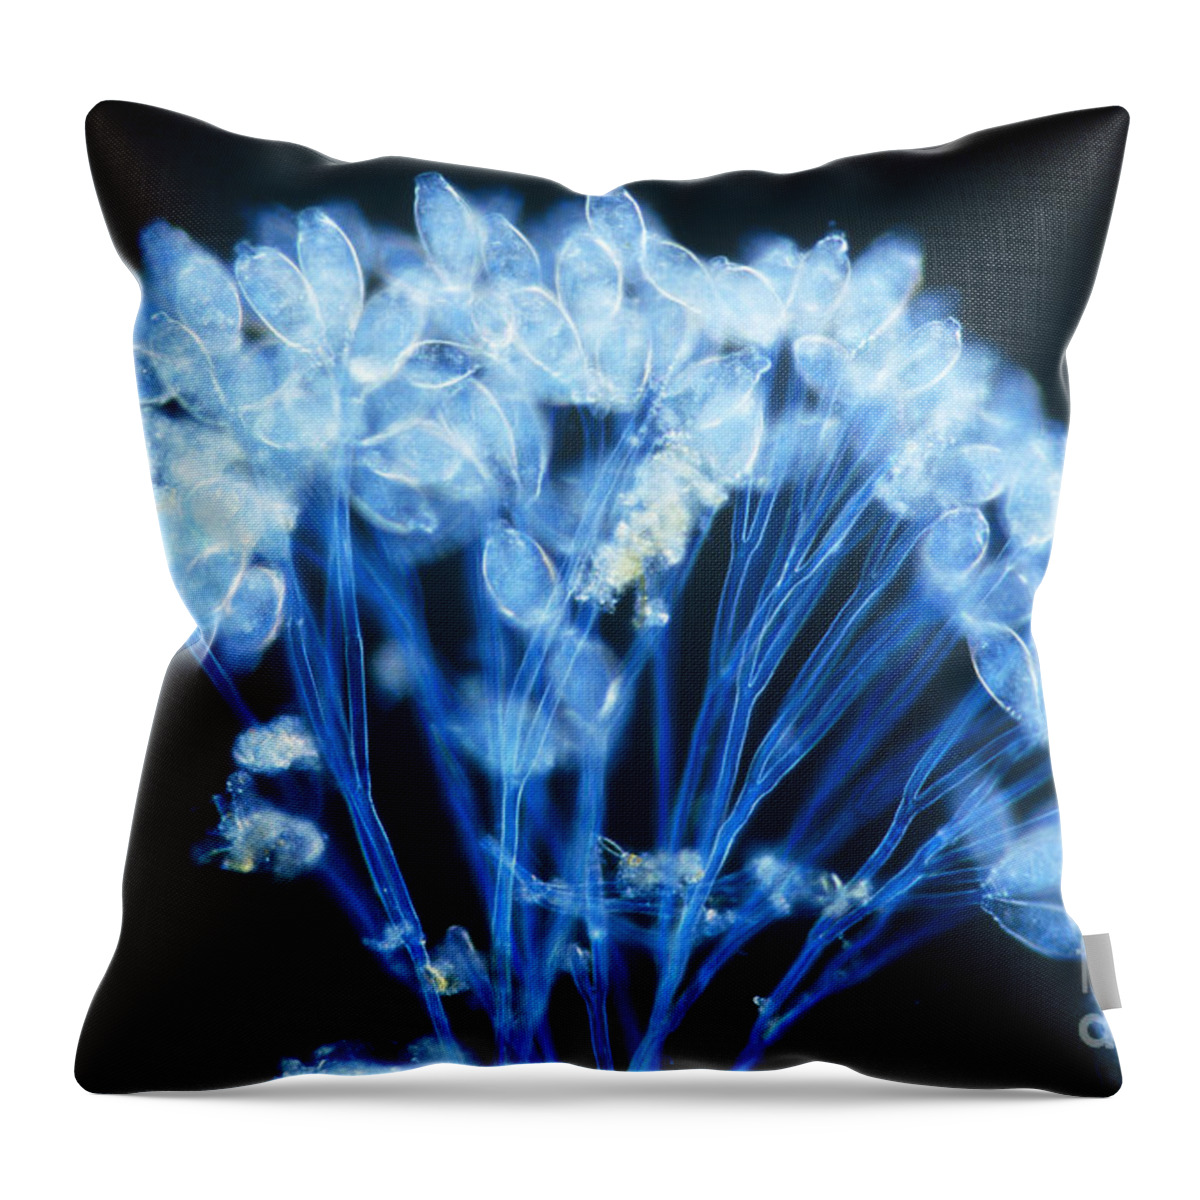 Microorganism Throw Pillow featuring the photograph Epistylis by Michael Abbey